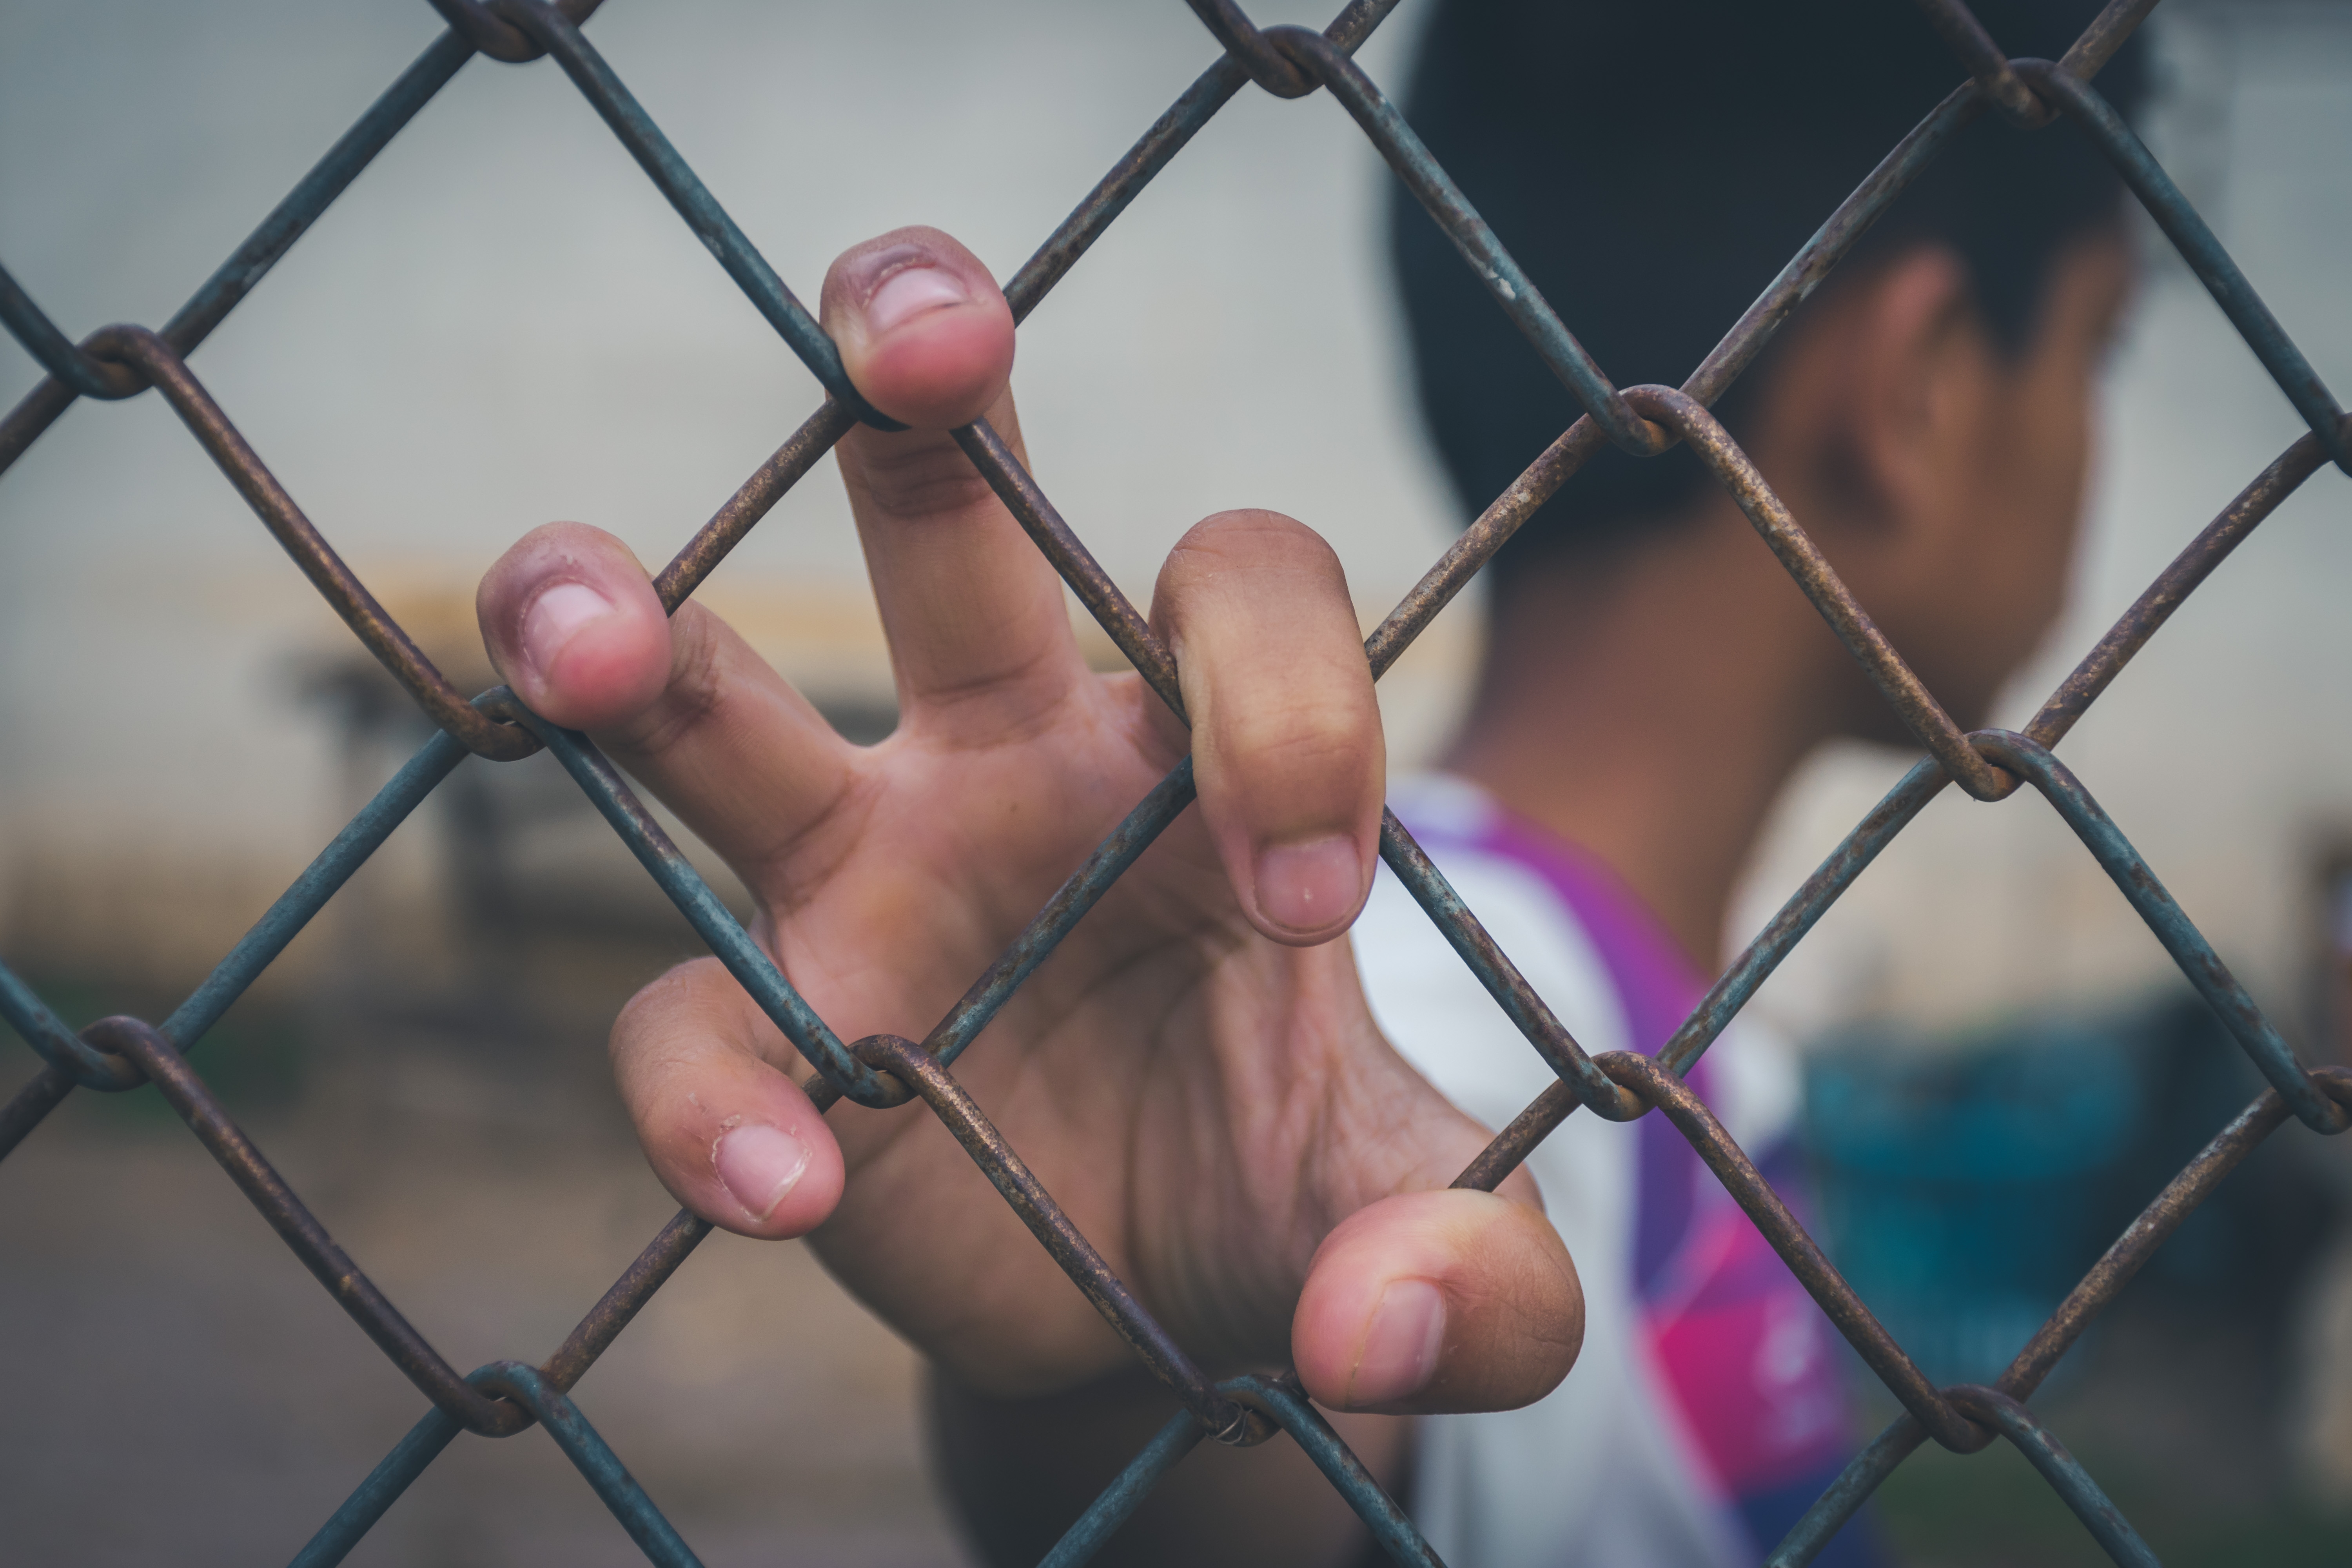 Boy turns head away and grips chain link fence